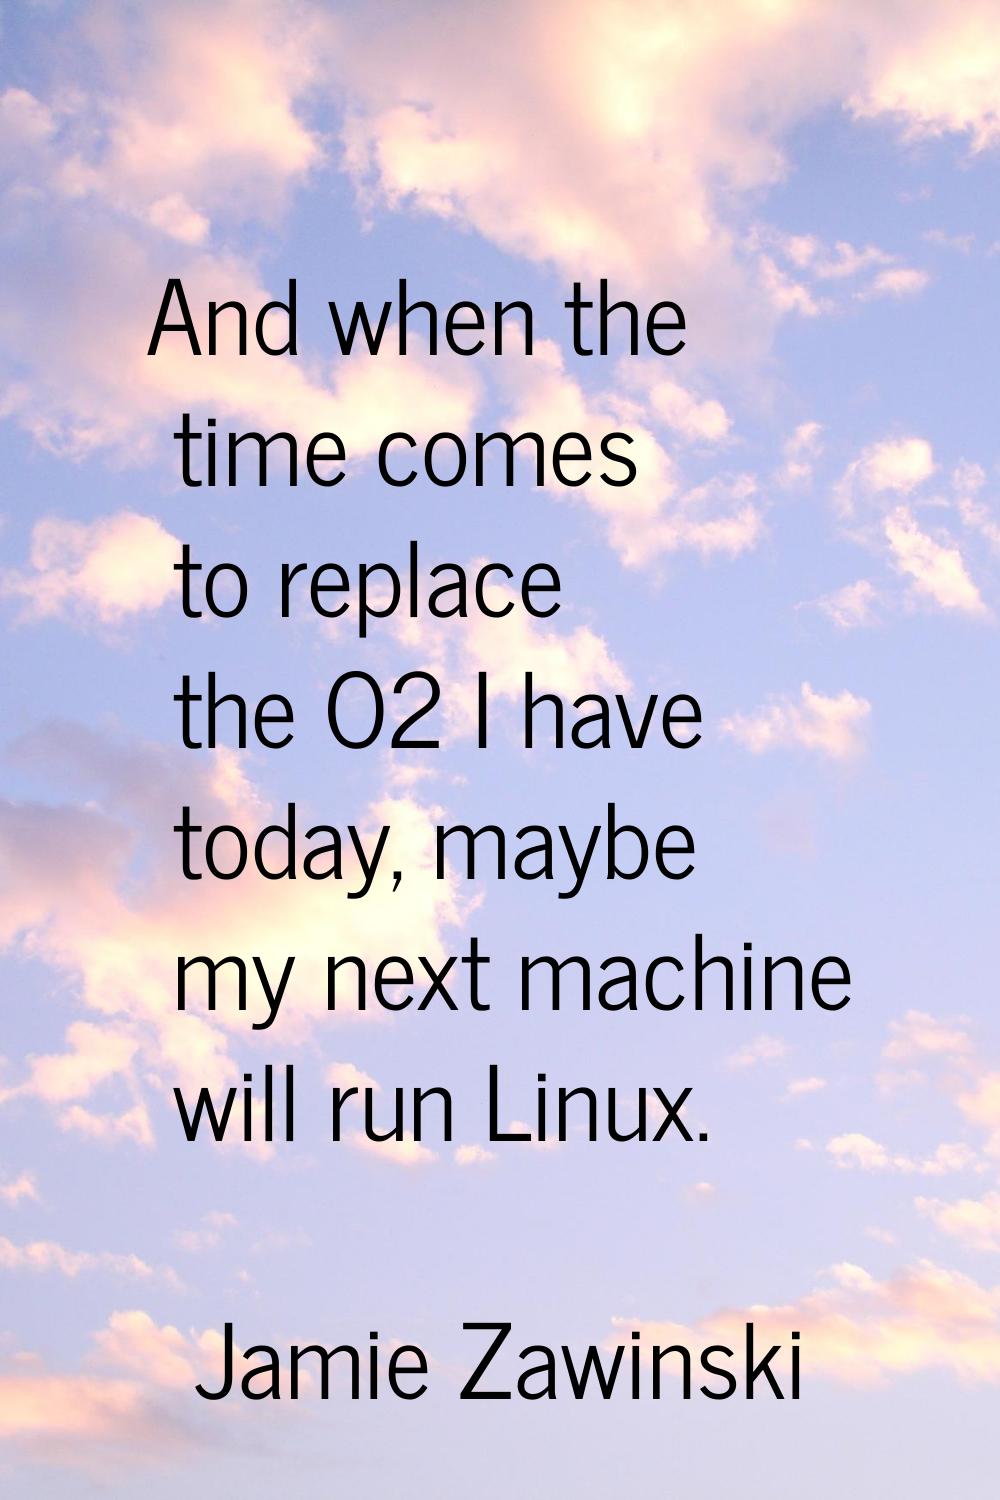 And when the time comes to replace the O2 I have today, maybe my next machine will run Linux.